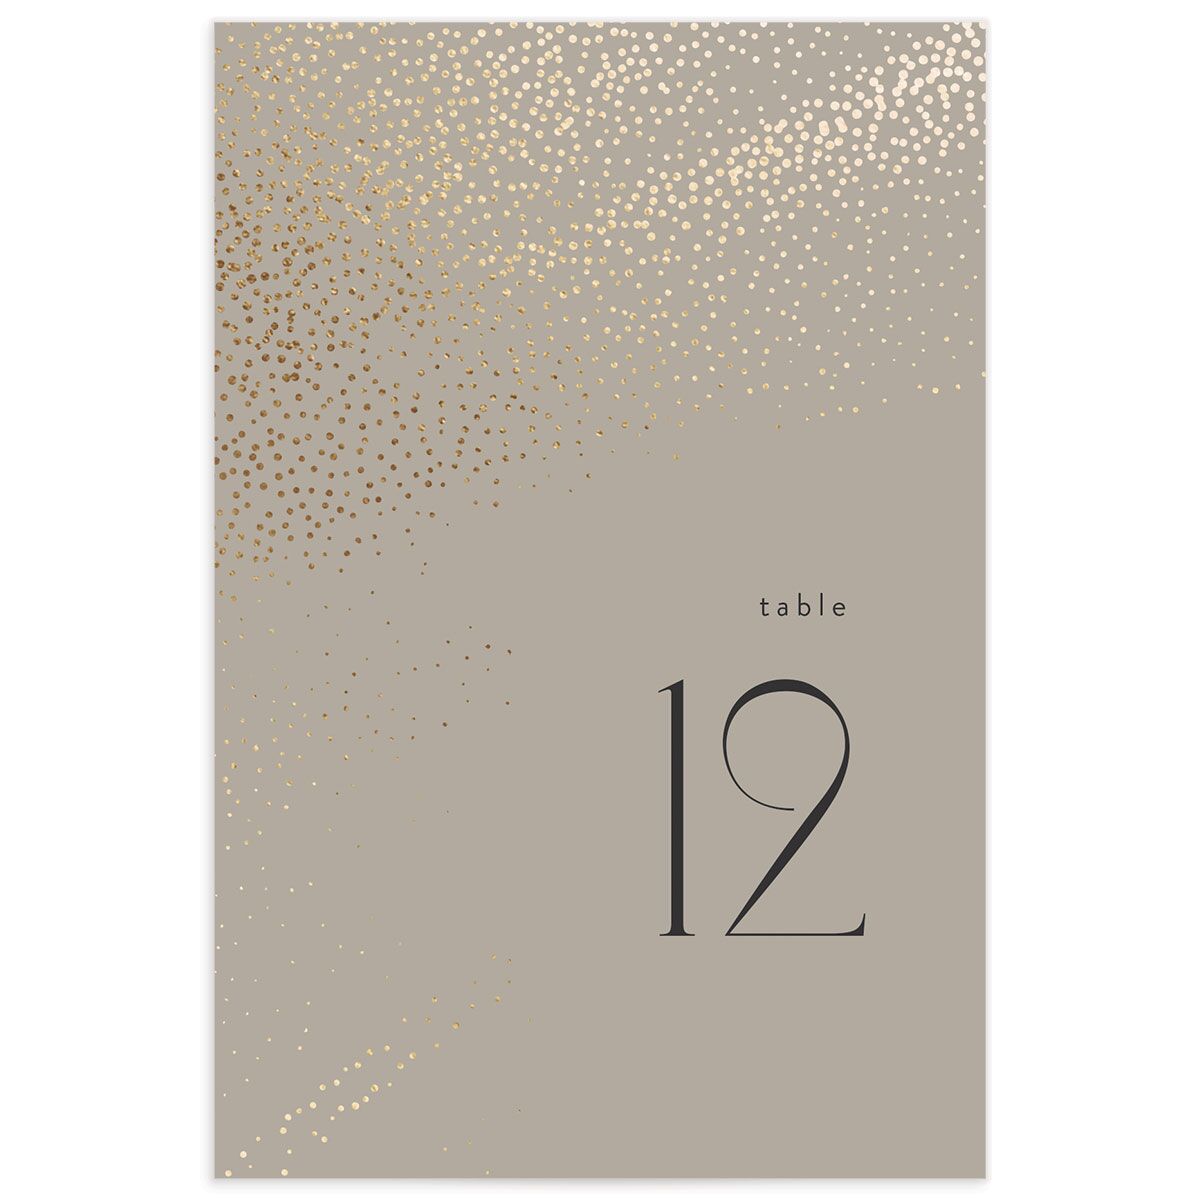 Sweeping Sparkles Table Numbers